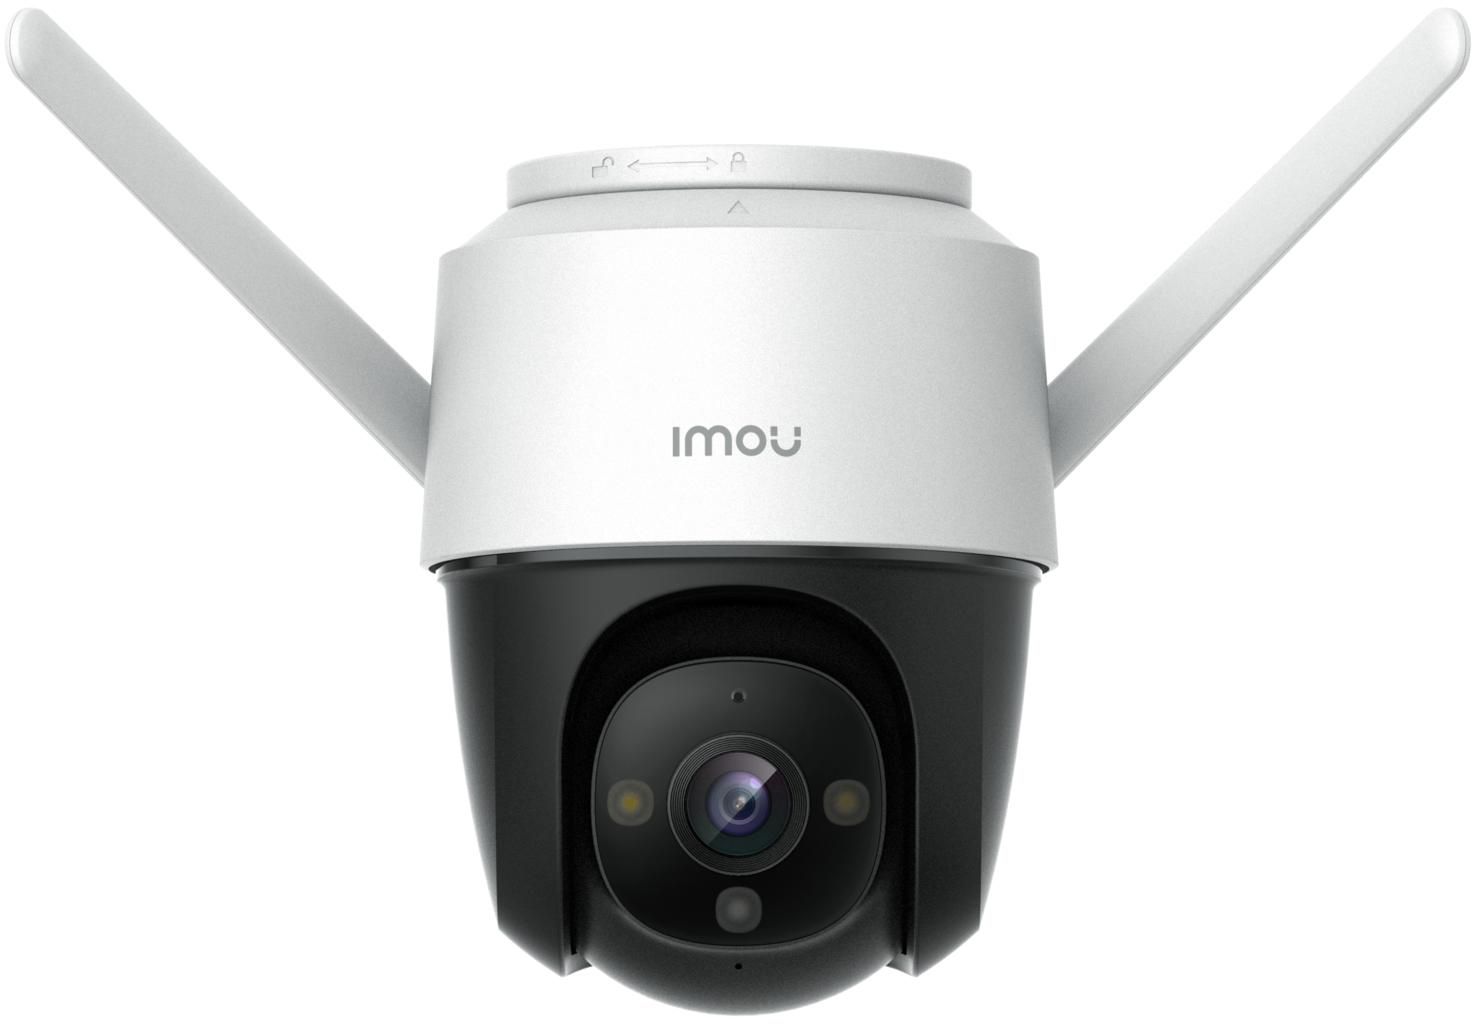 IMOU Cruiser 4MP 1440P Wifi Smart Home Outdoor Security Camera, 360 Degree, IP66 Dust and Water Protection, Built-in Spotlight and Siren, Two-way Talk, AI Imou Cloud/SD CardStorage